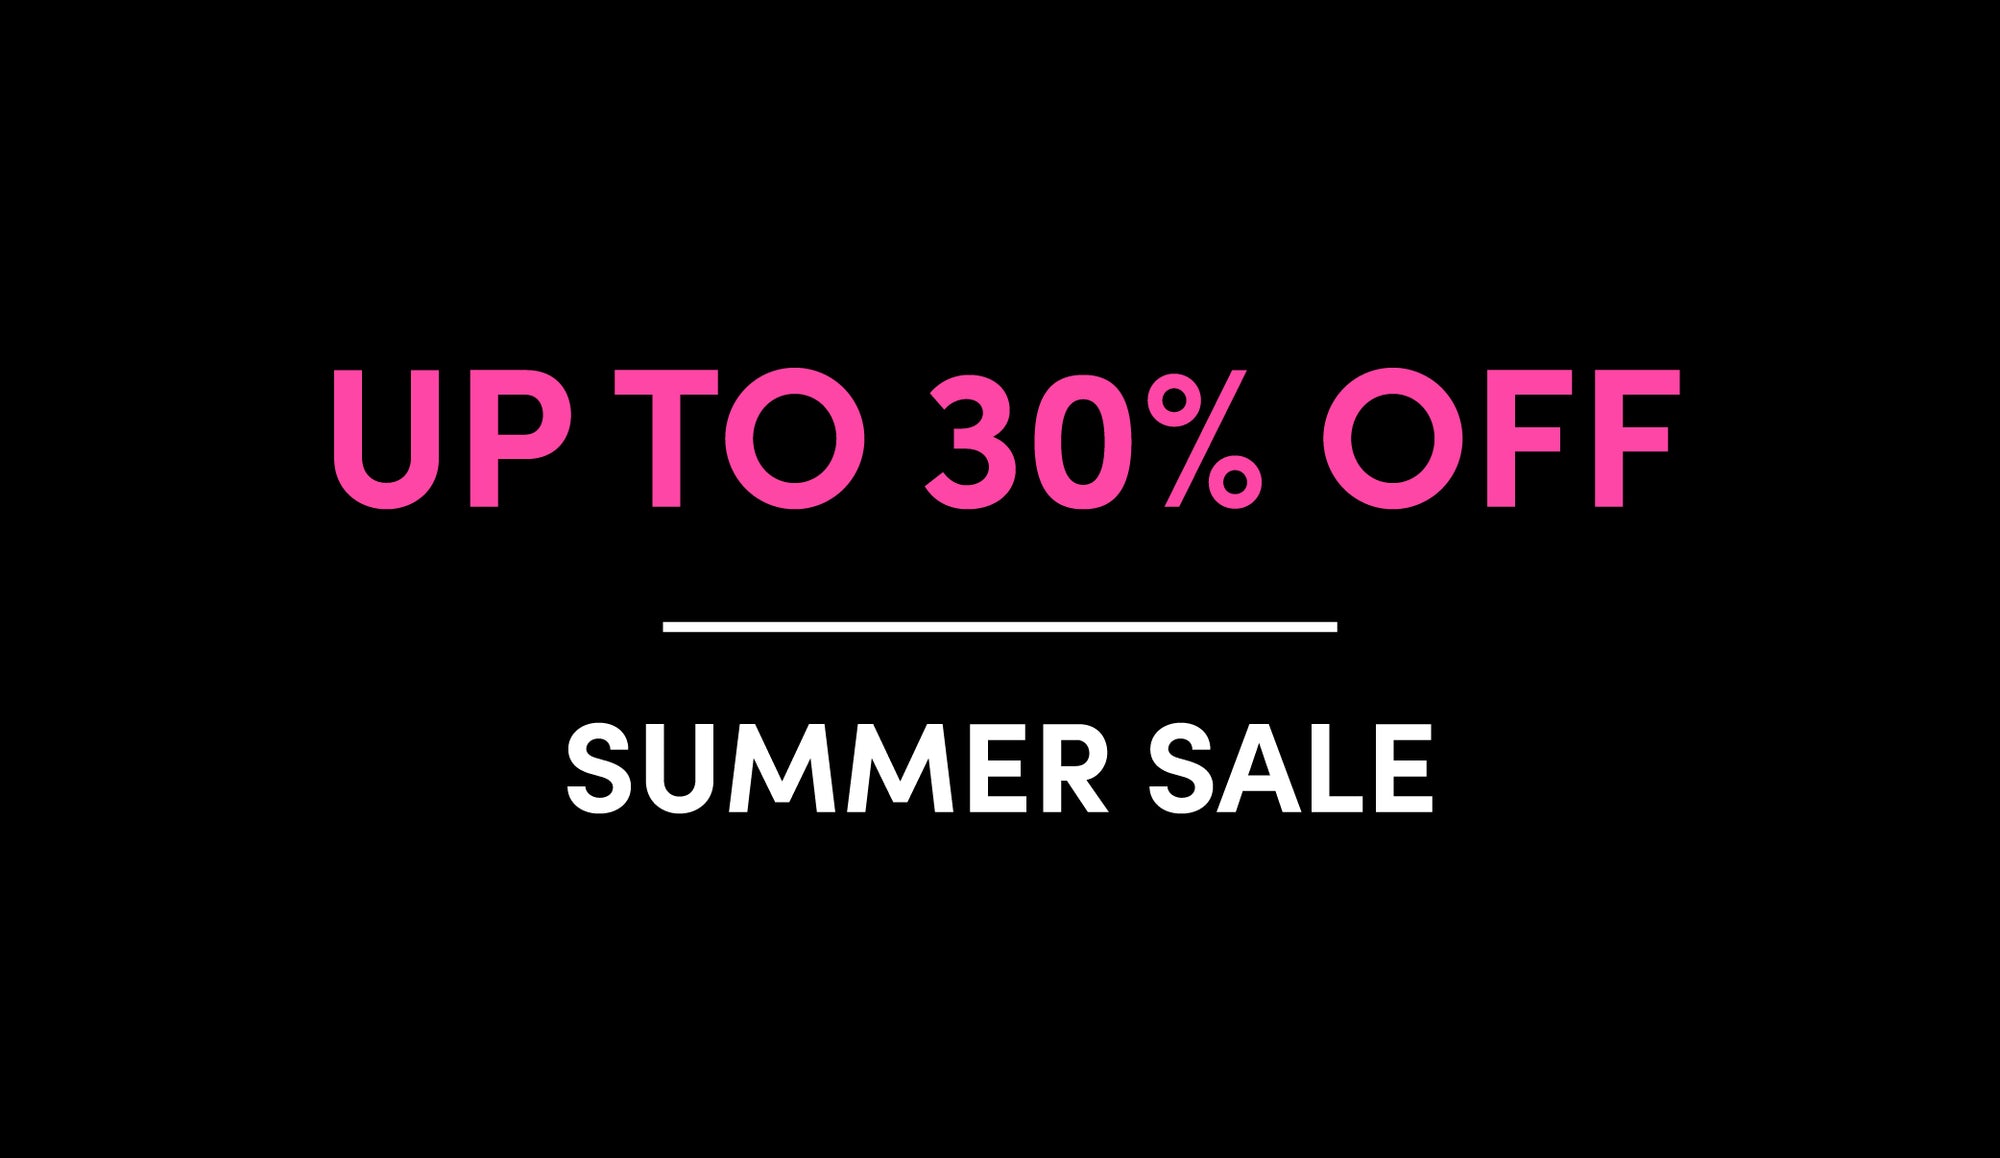 Up to 30% off Summer Sale